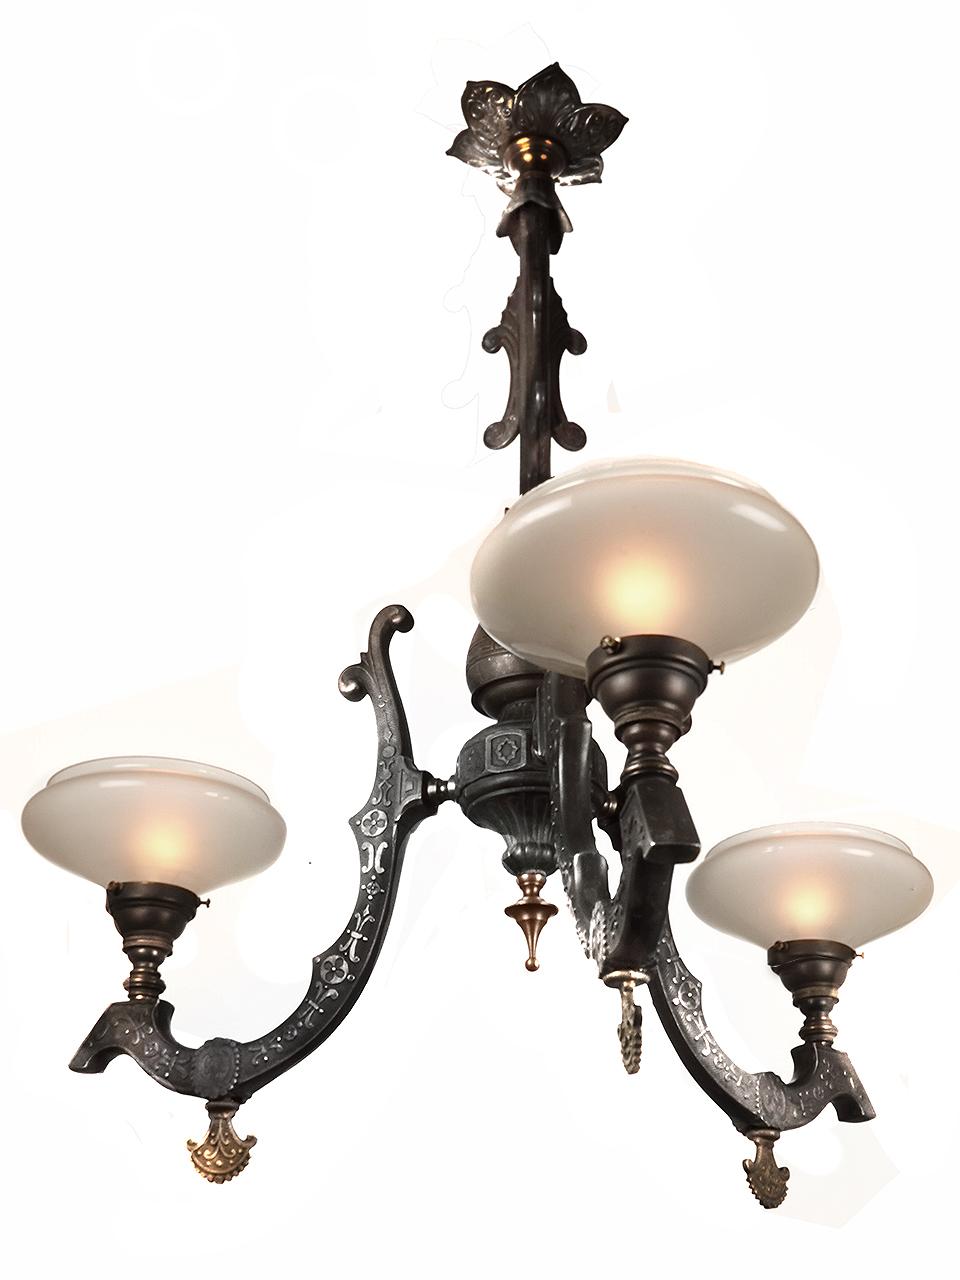 This is a beautiful three-arm Neo-Grec gas chandelier, circa 1870. The fixture is mixed metals of spelter and brass in excellent condition. It is attributed to Cornelius & Baker of Philadelphia. It has been newly wired to take 3 standard light